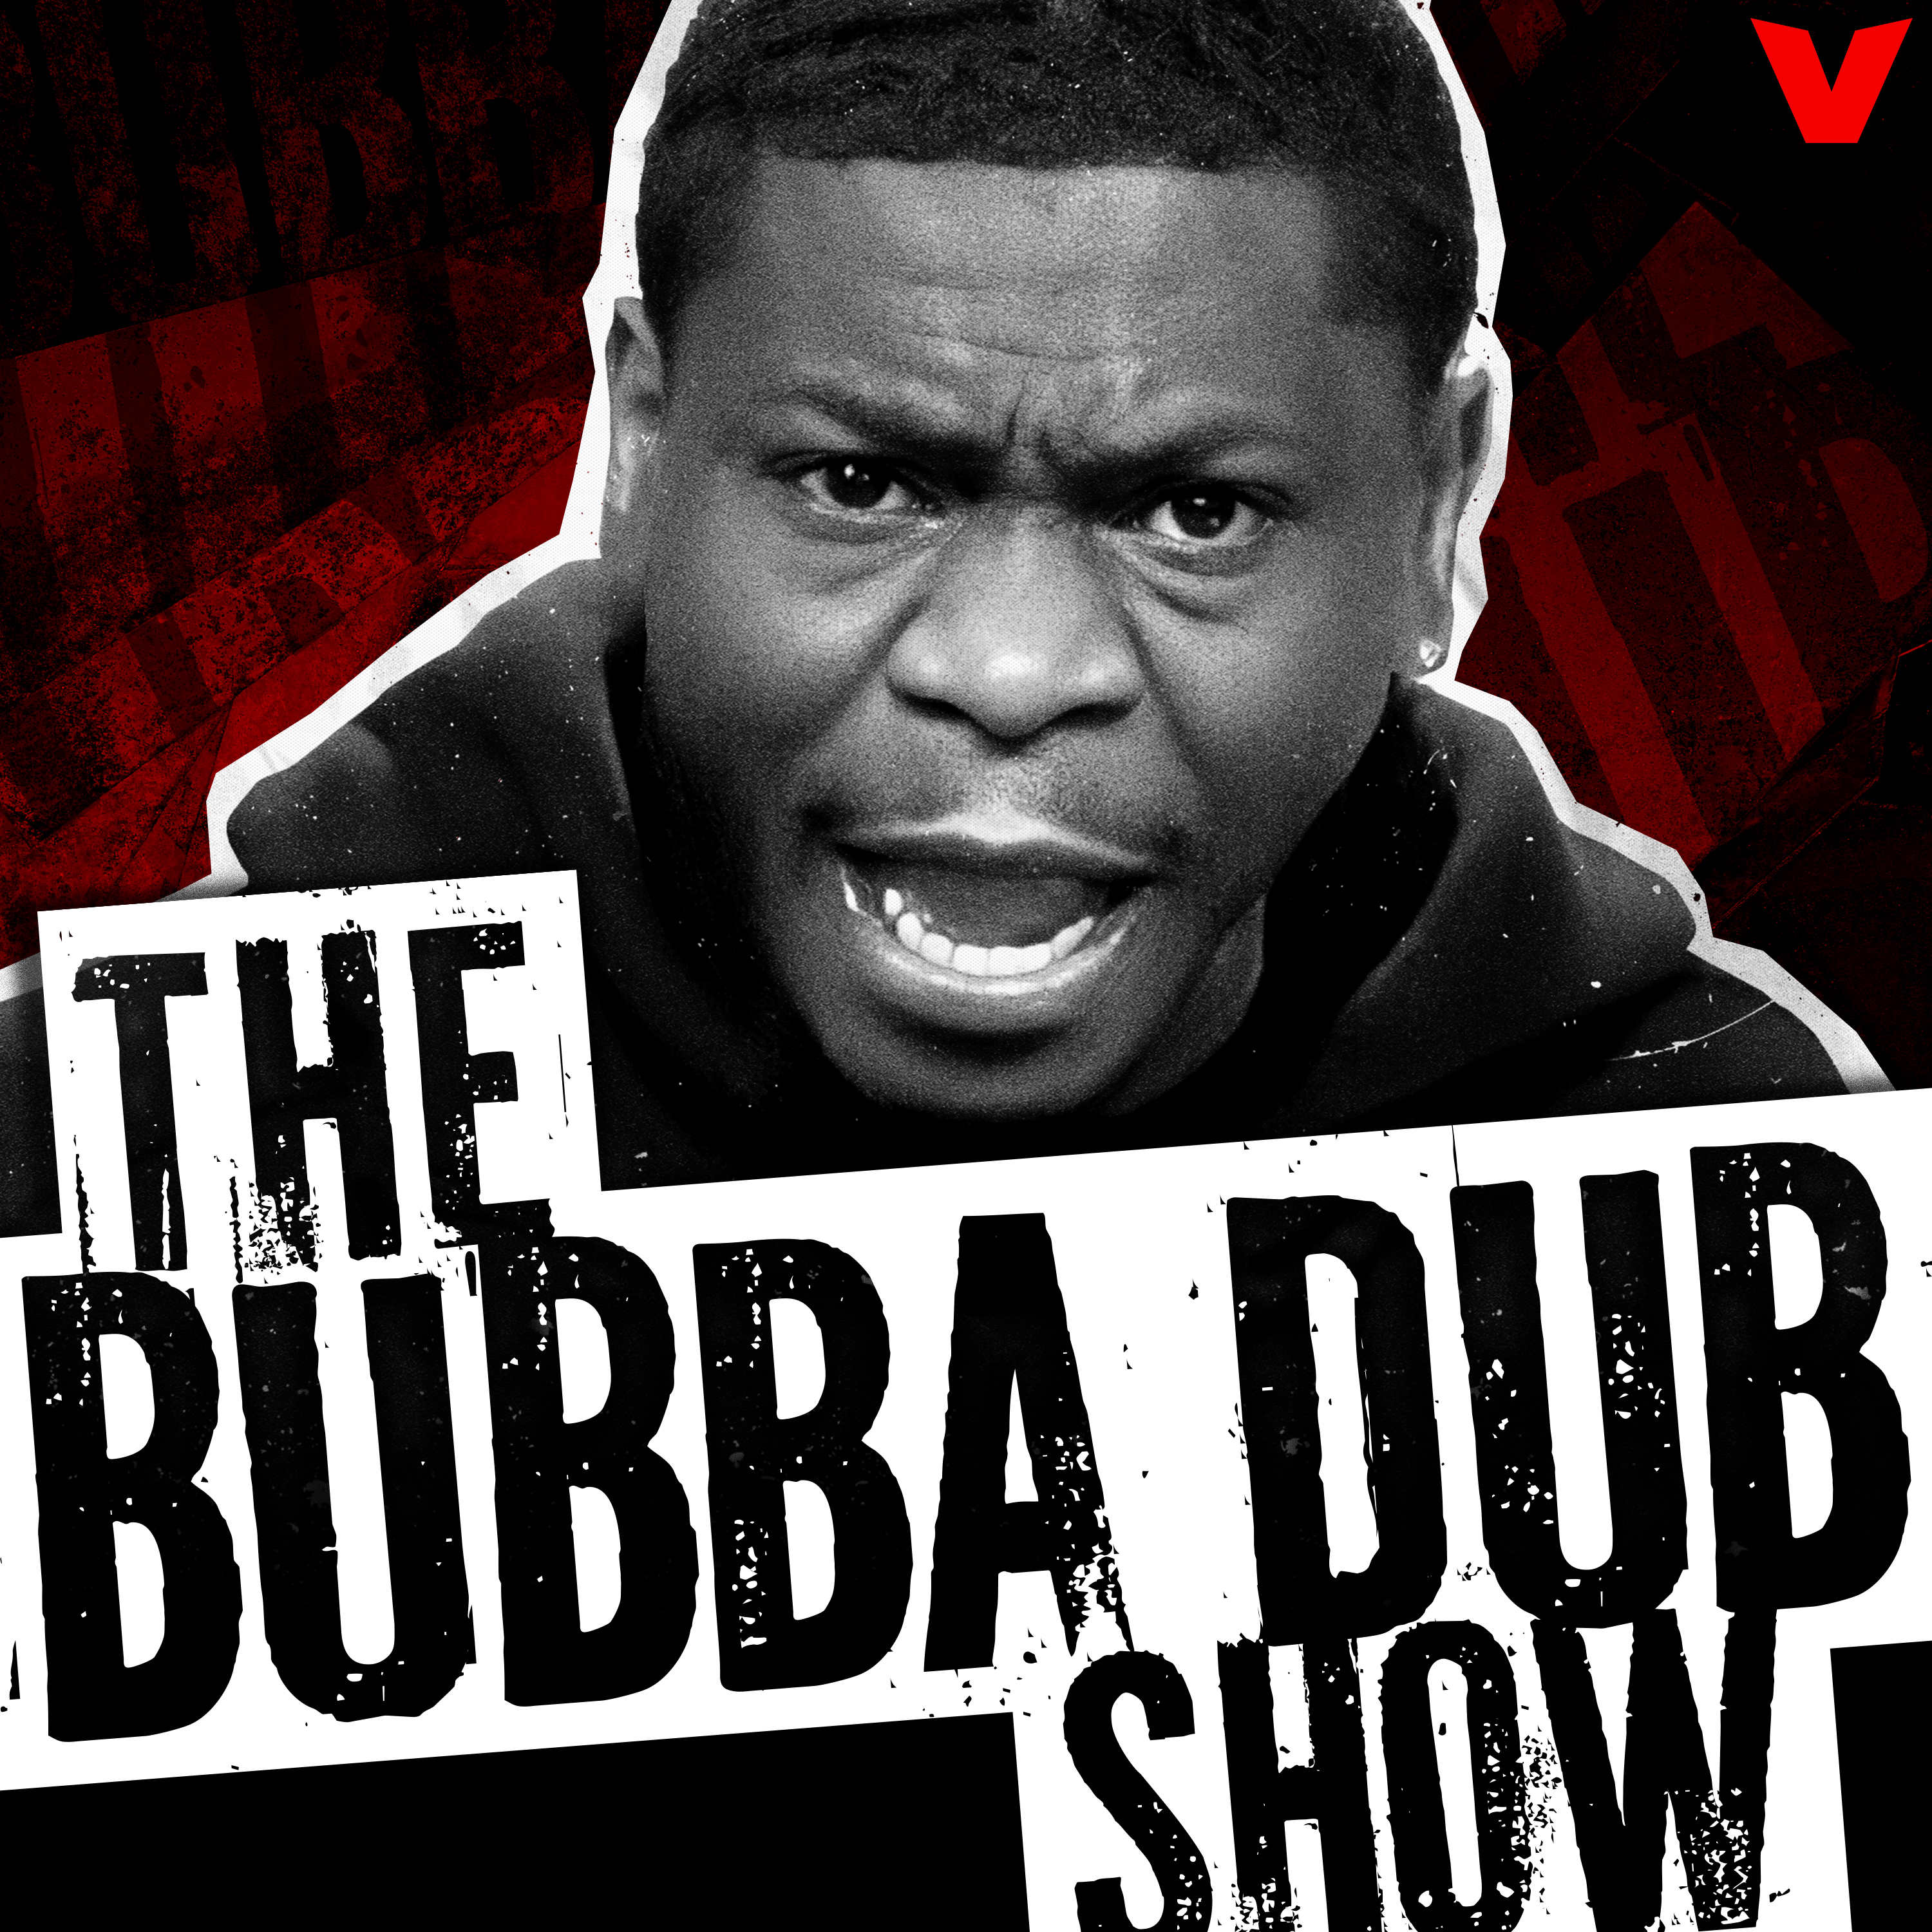 The Bubba Dub Show - Garcia Tests Positive For PEDs, Doncic/Irving NBA’s Best Duo, Celtics Eliminate Heat